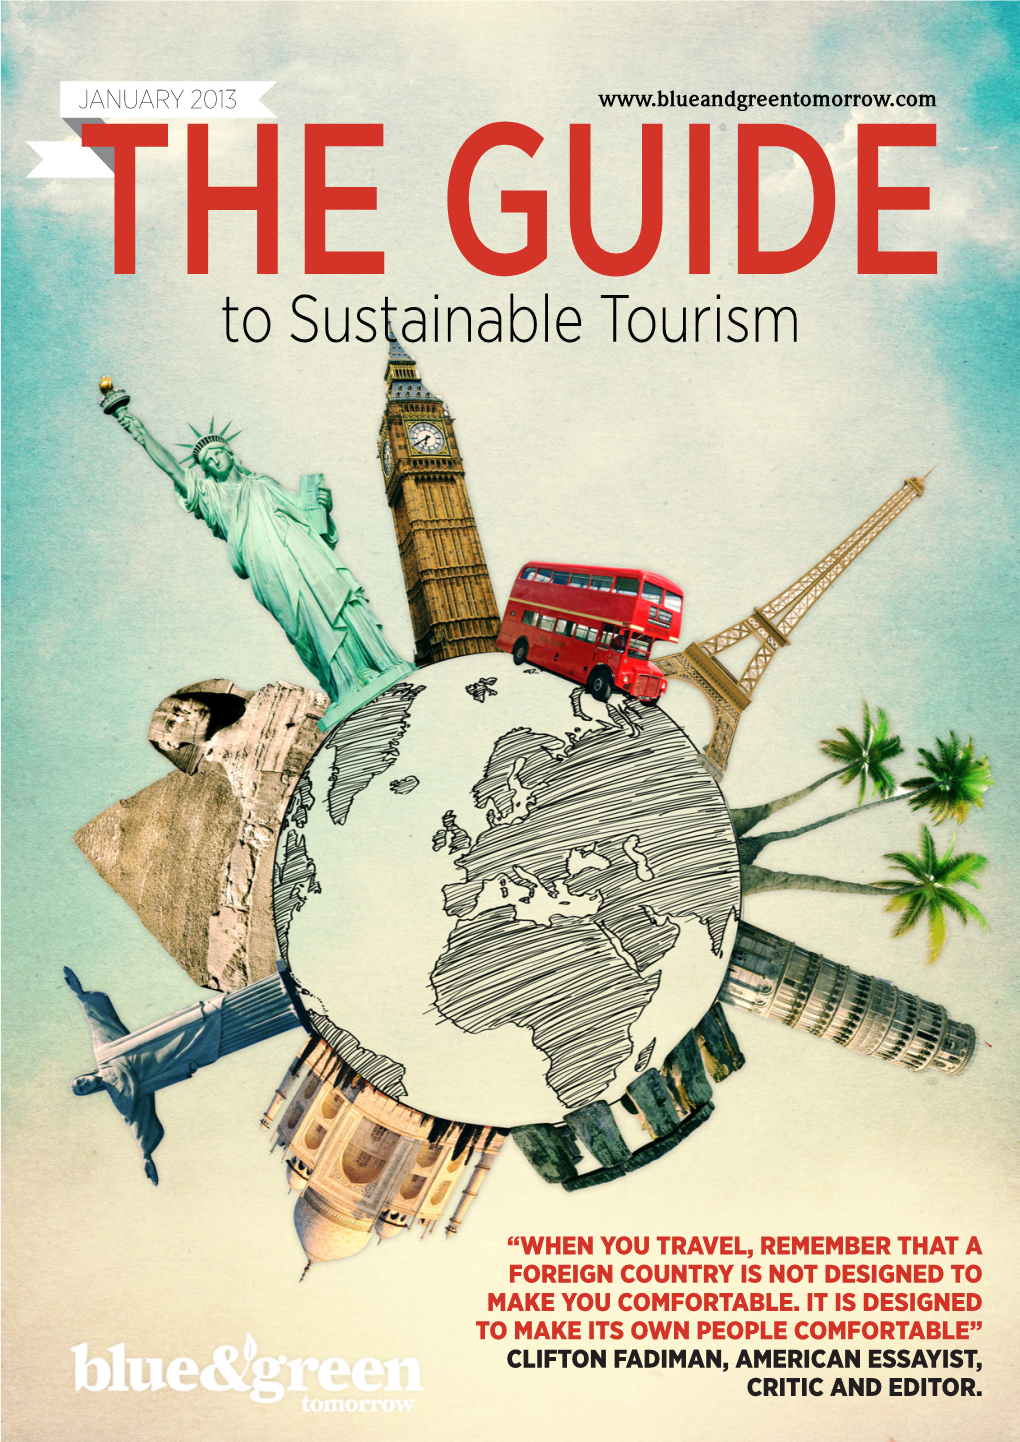 The Guide to Sustainable Tourism 2013 Is the First Blue & Green Tomorrow Report of the Year